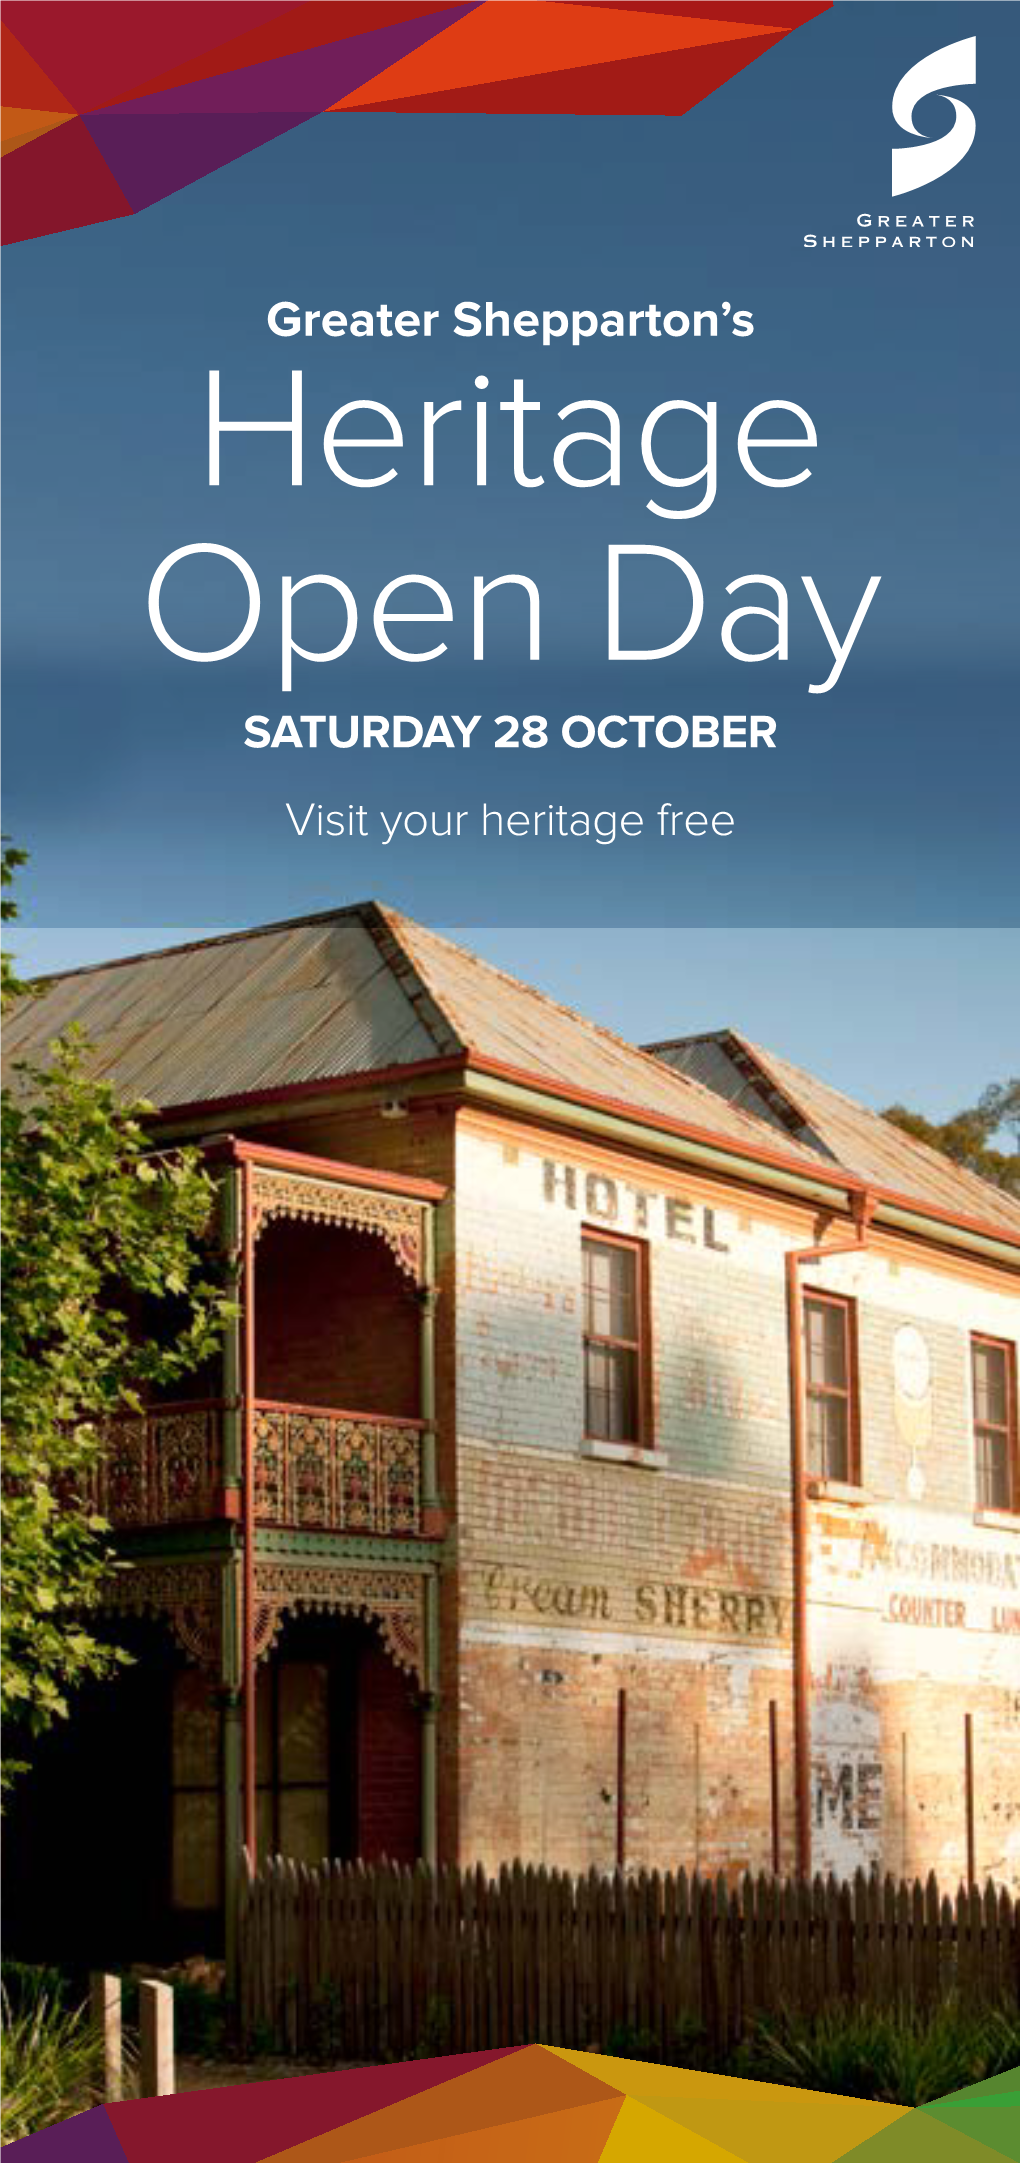 Heritage Open Day SATURDAY 28 OCTOBER Visit Your Heritage Free Welcome to the Greater Shepparton Heritage Open Day